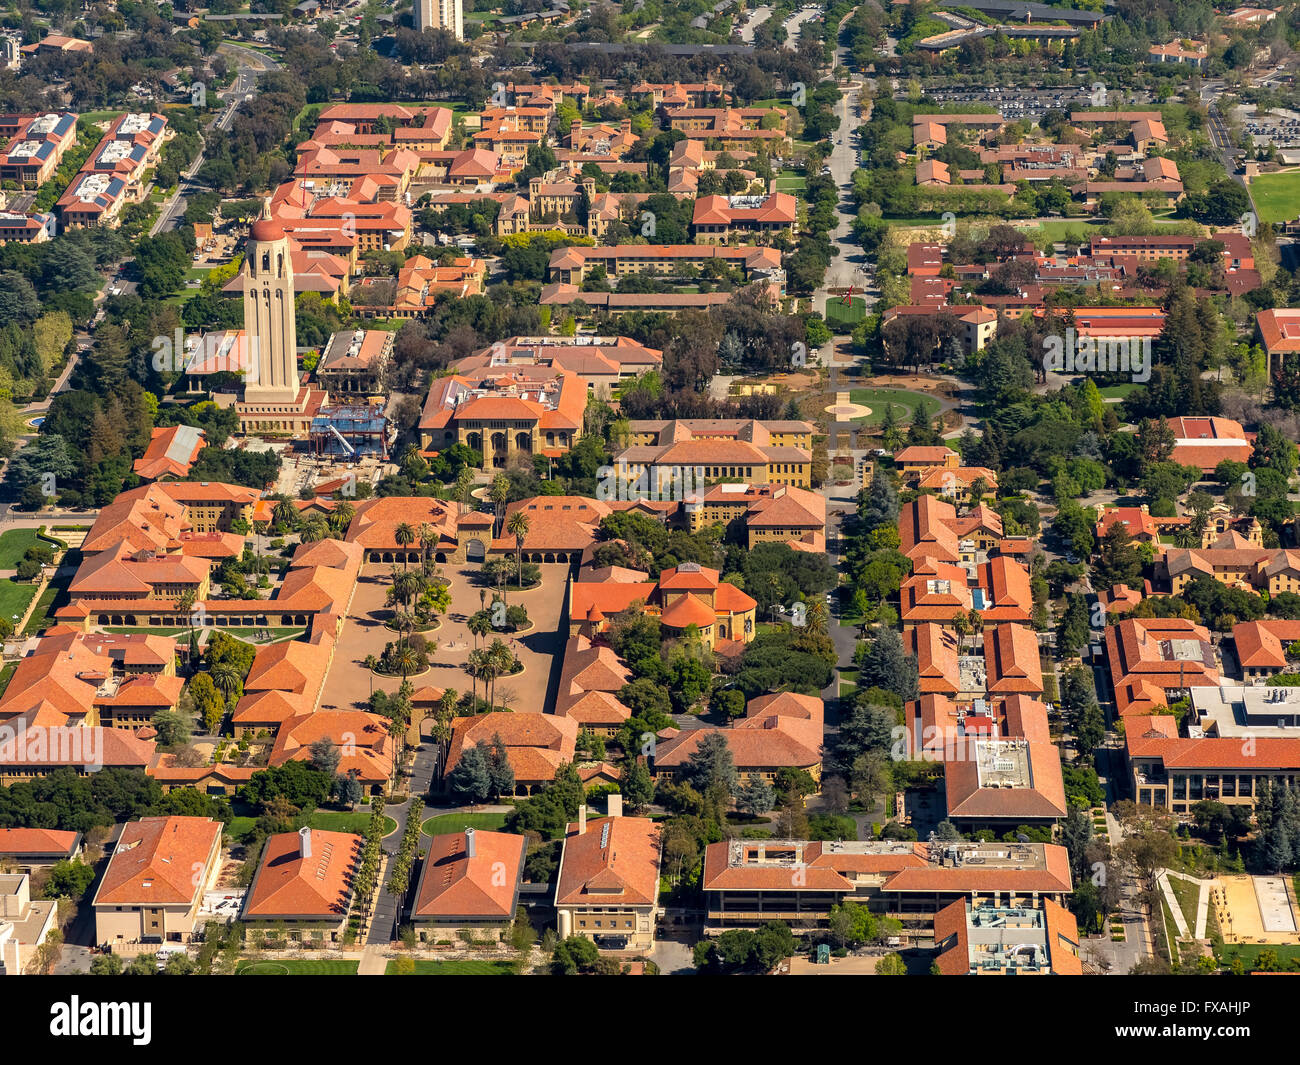 University Campus Stanford University with Hoover Tower, Palo Alto, California, Silicon Valley, California, USA Stock Photo